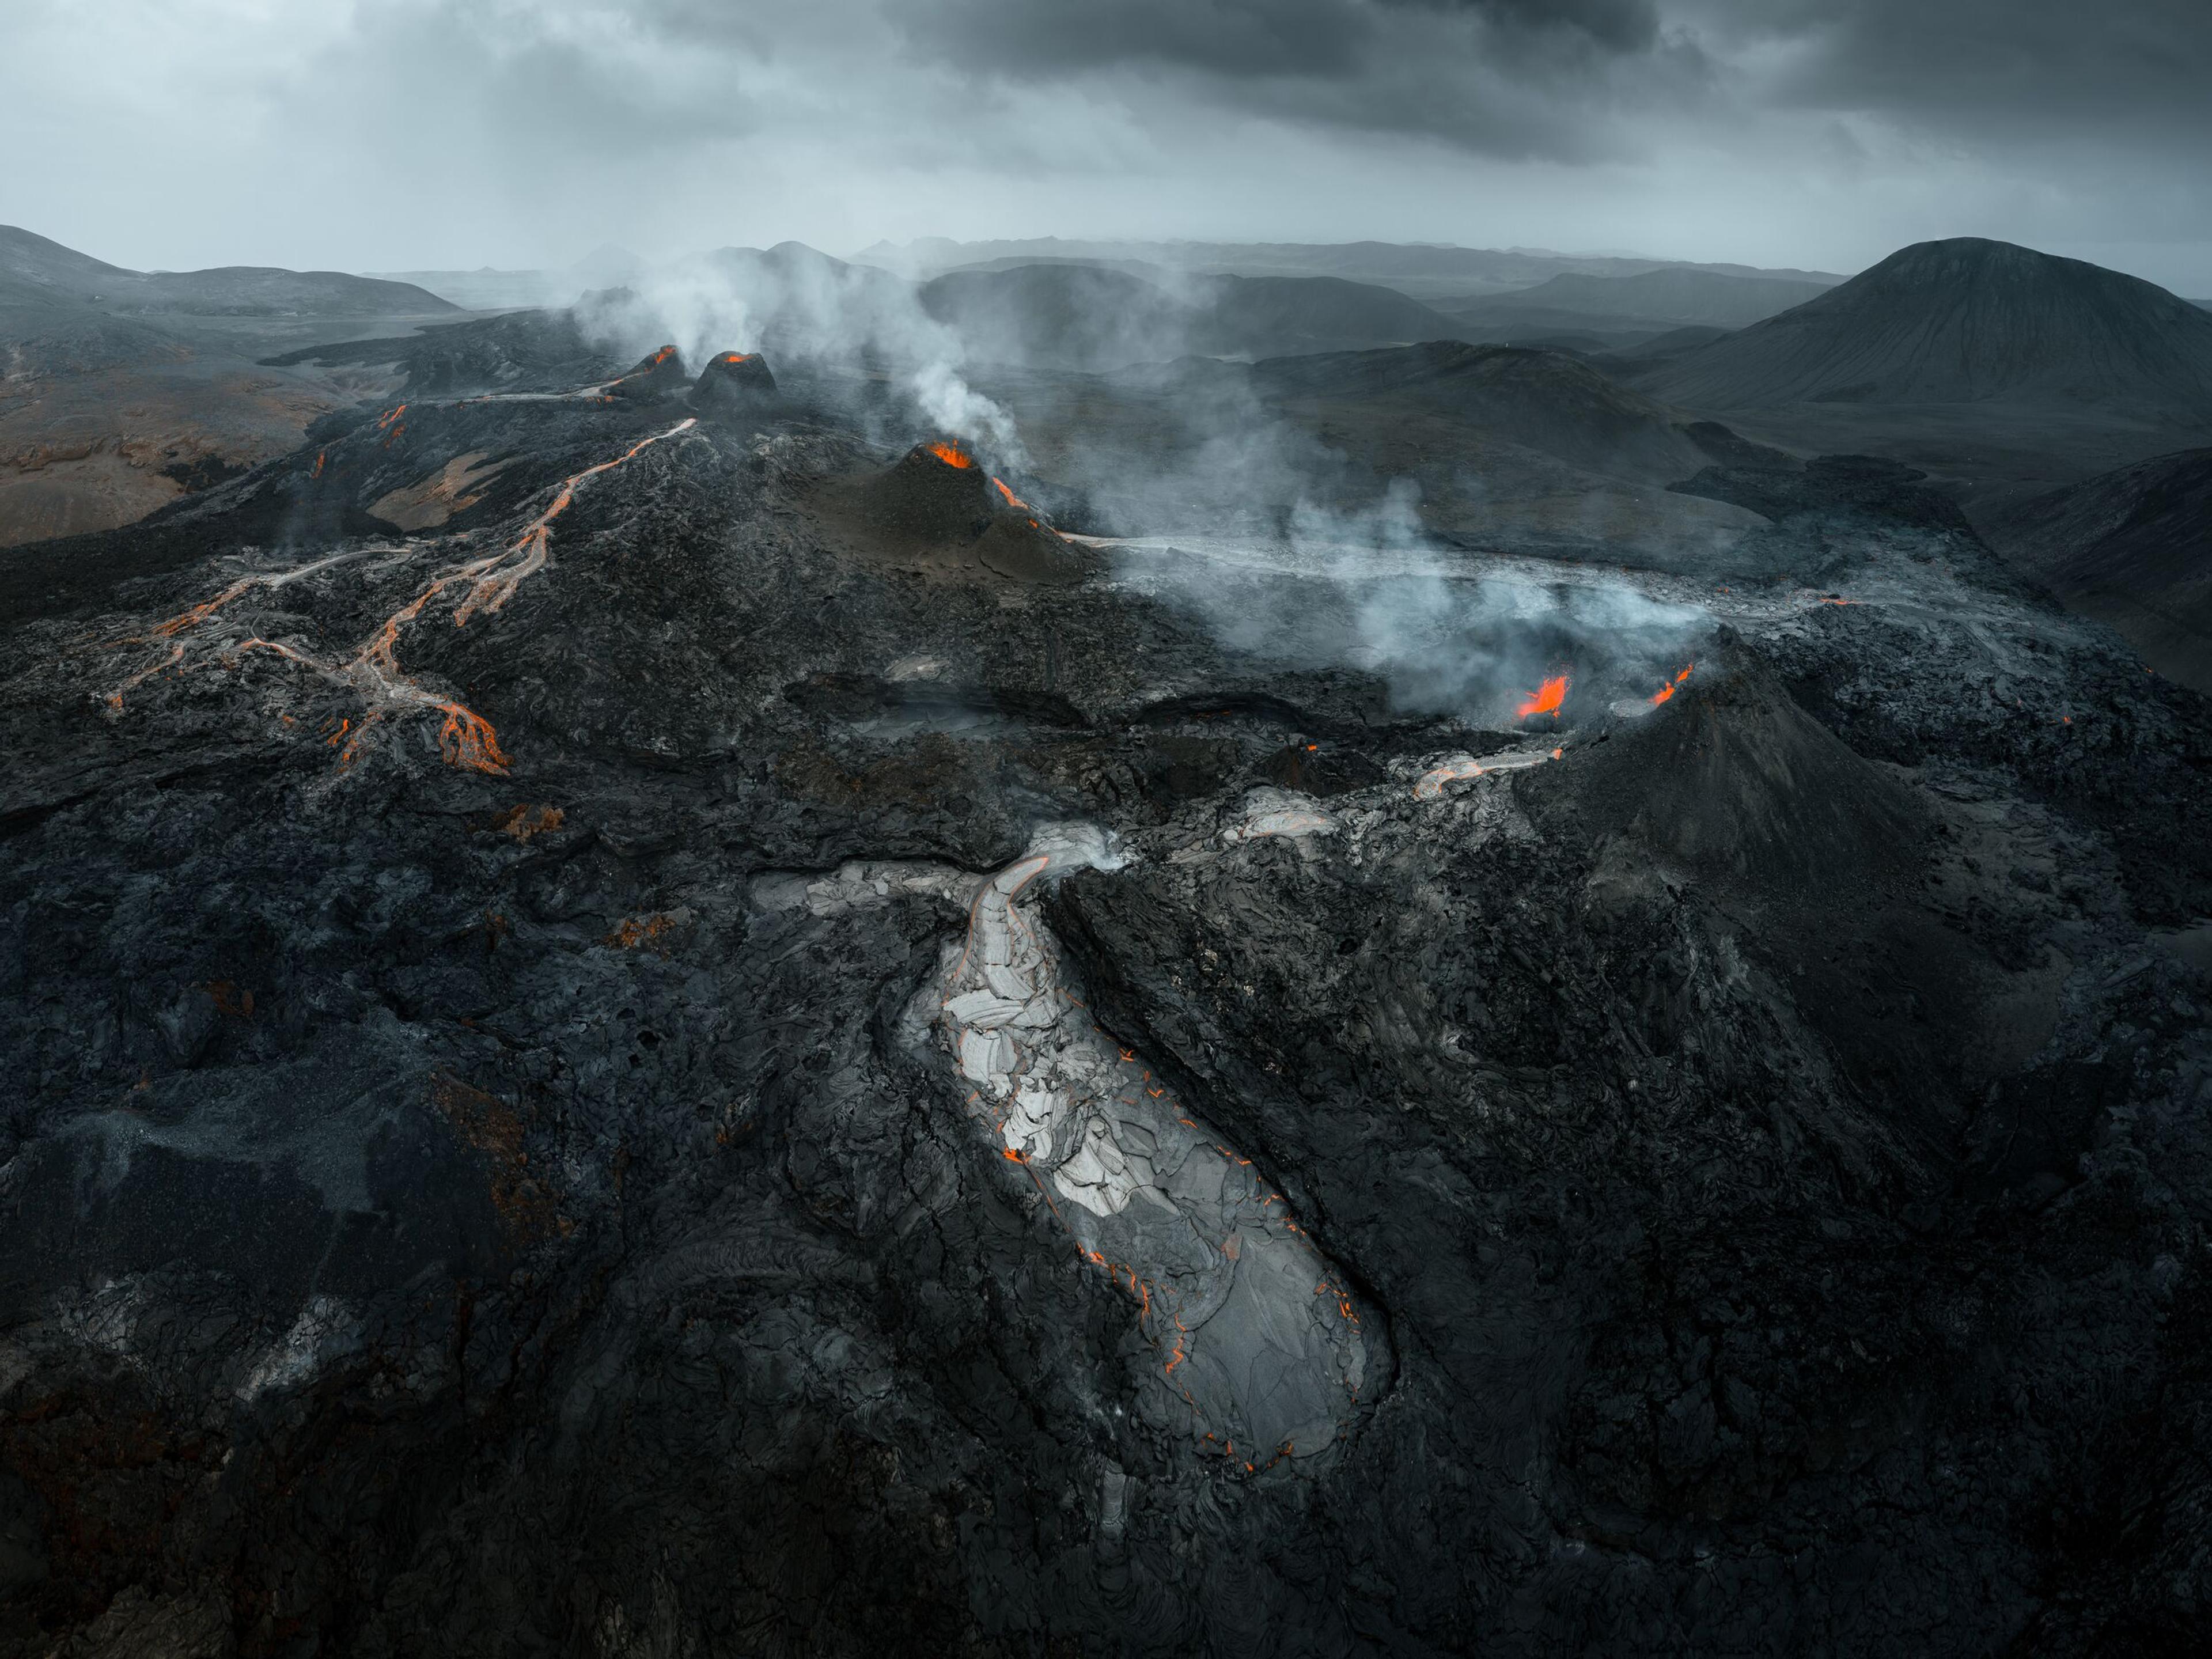 Aerial view of an active volcano with smoke and lava flows against a stormy sky.